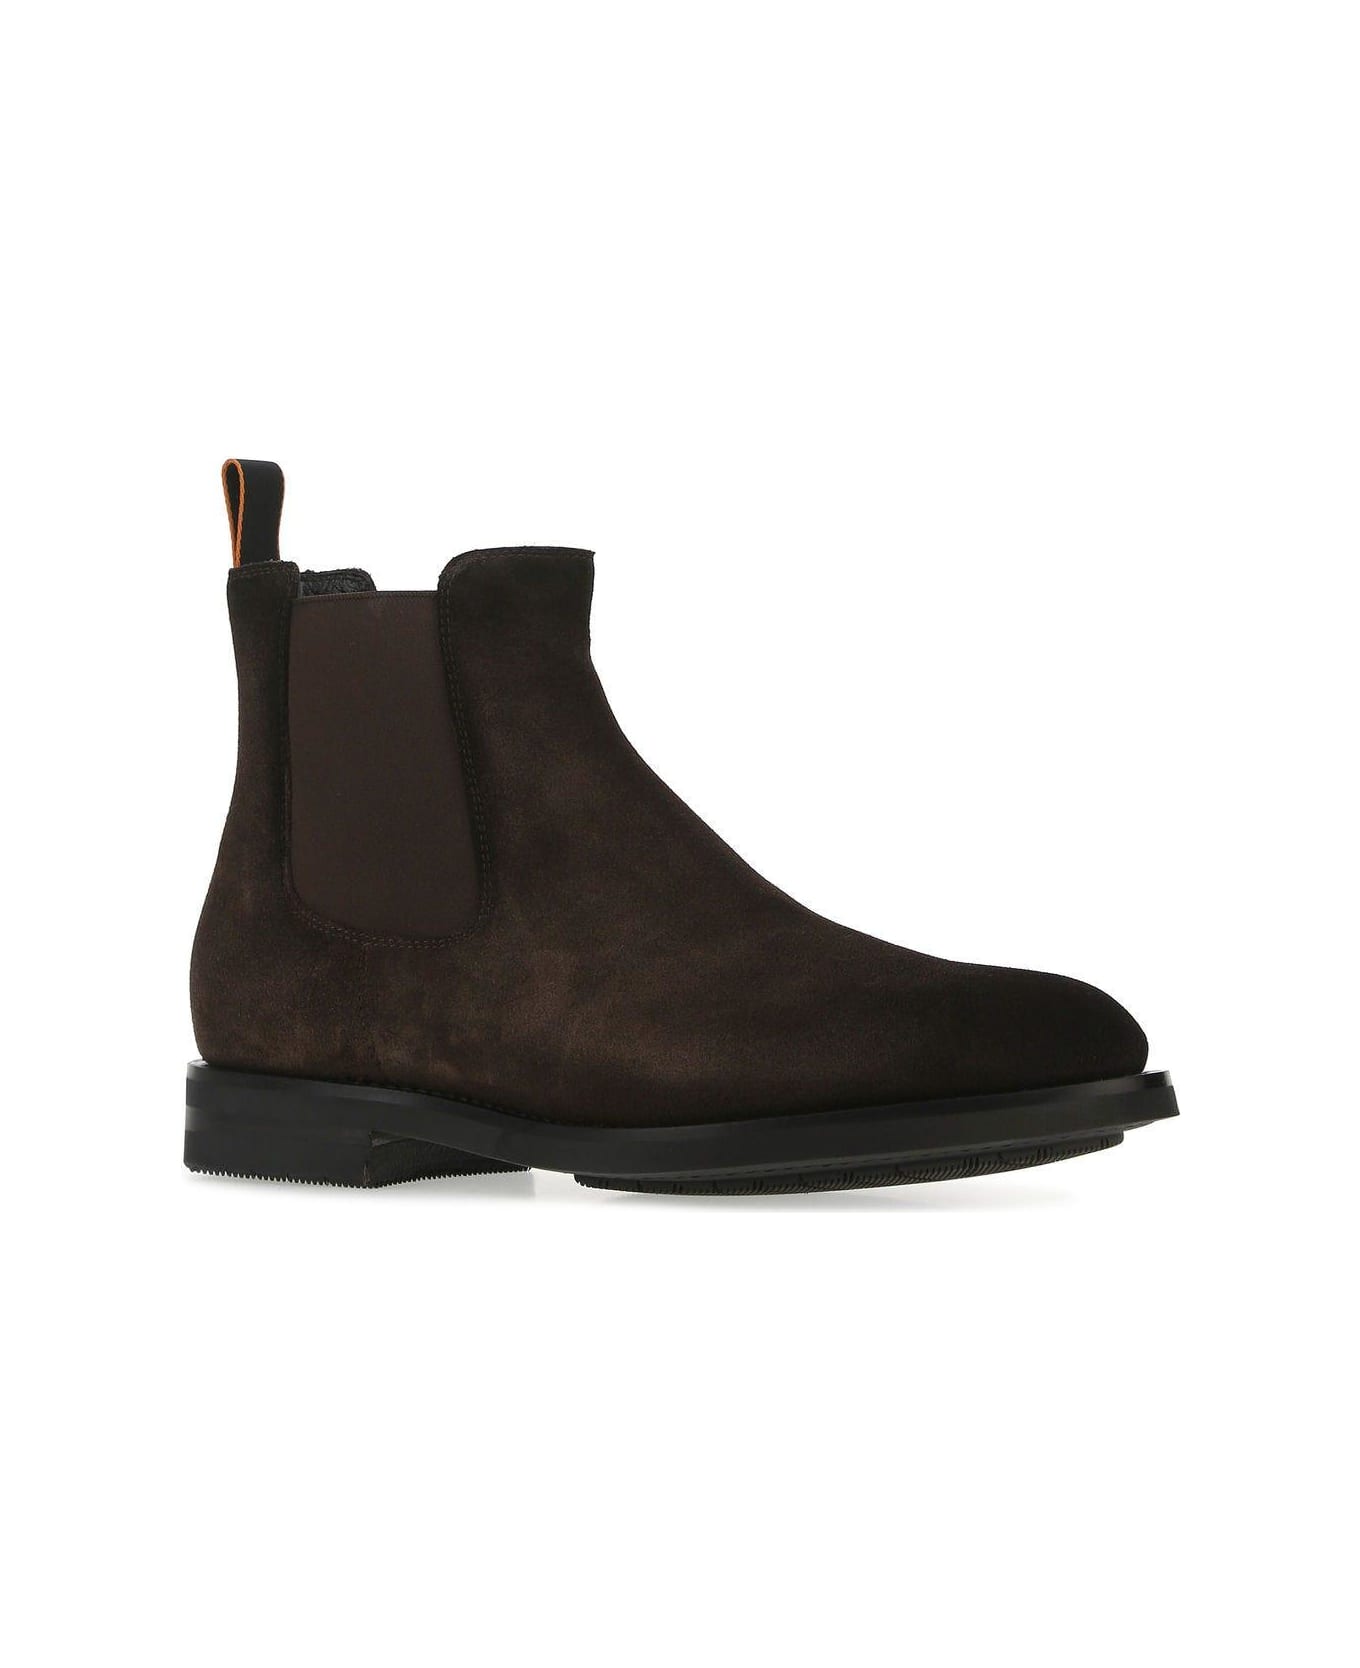 Santoni Brown Suede Ankle Boots - BROWN ブーツ